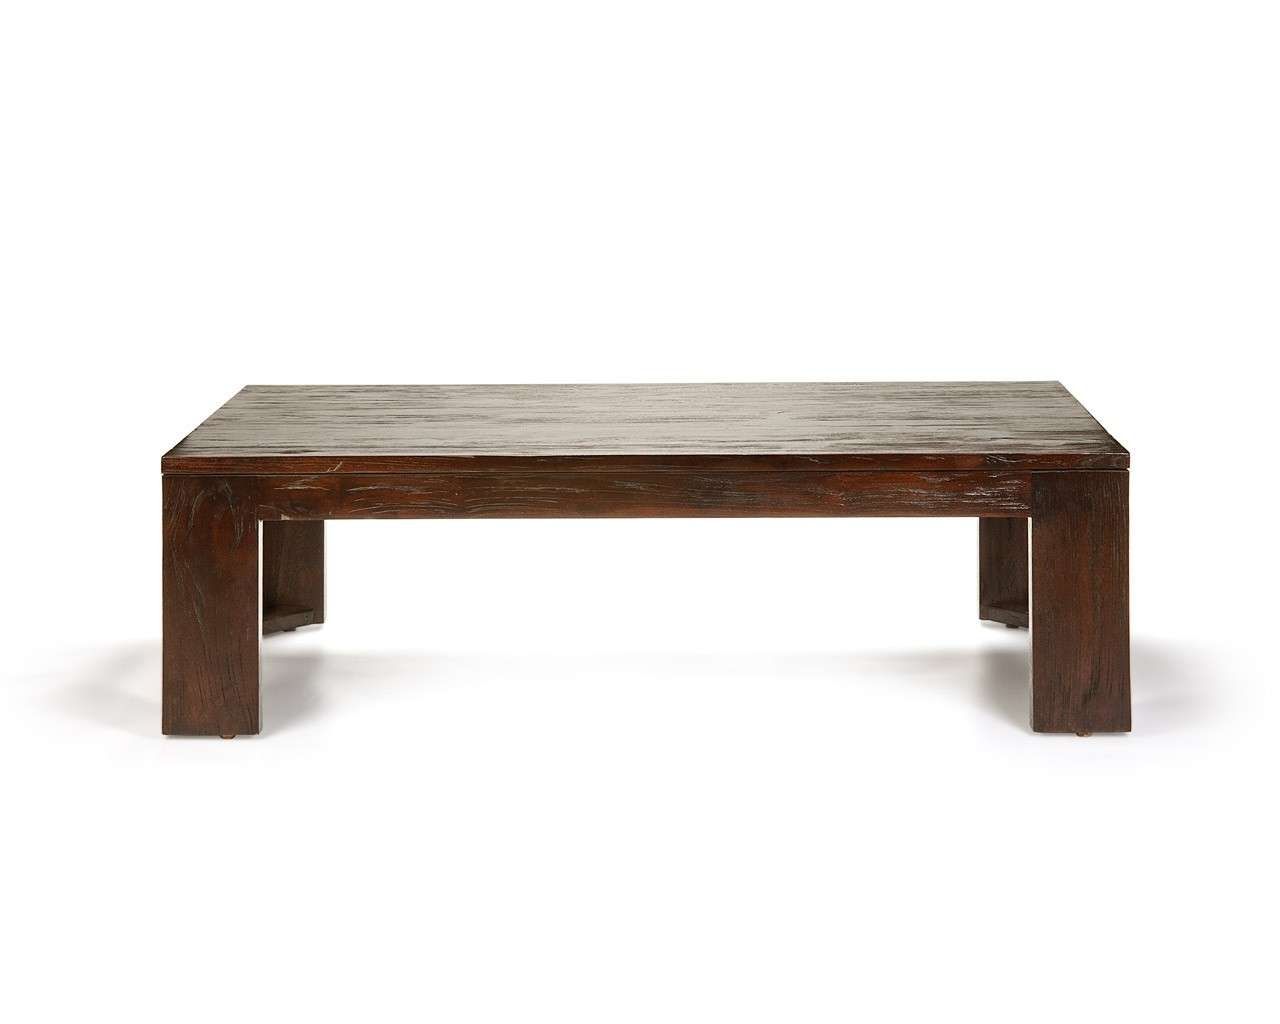 Fashionable Dark Wood Coffee Tables For Coffee Tables Ideas: Vintage Motifs Dark Wood Coffee Tables (Gallery 1 of 20)